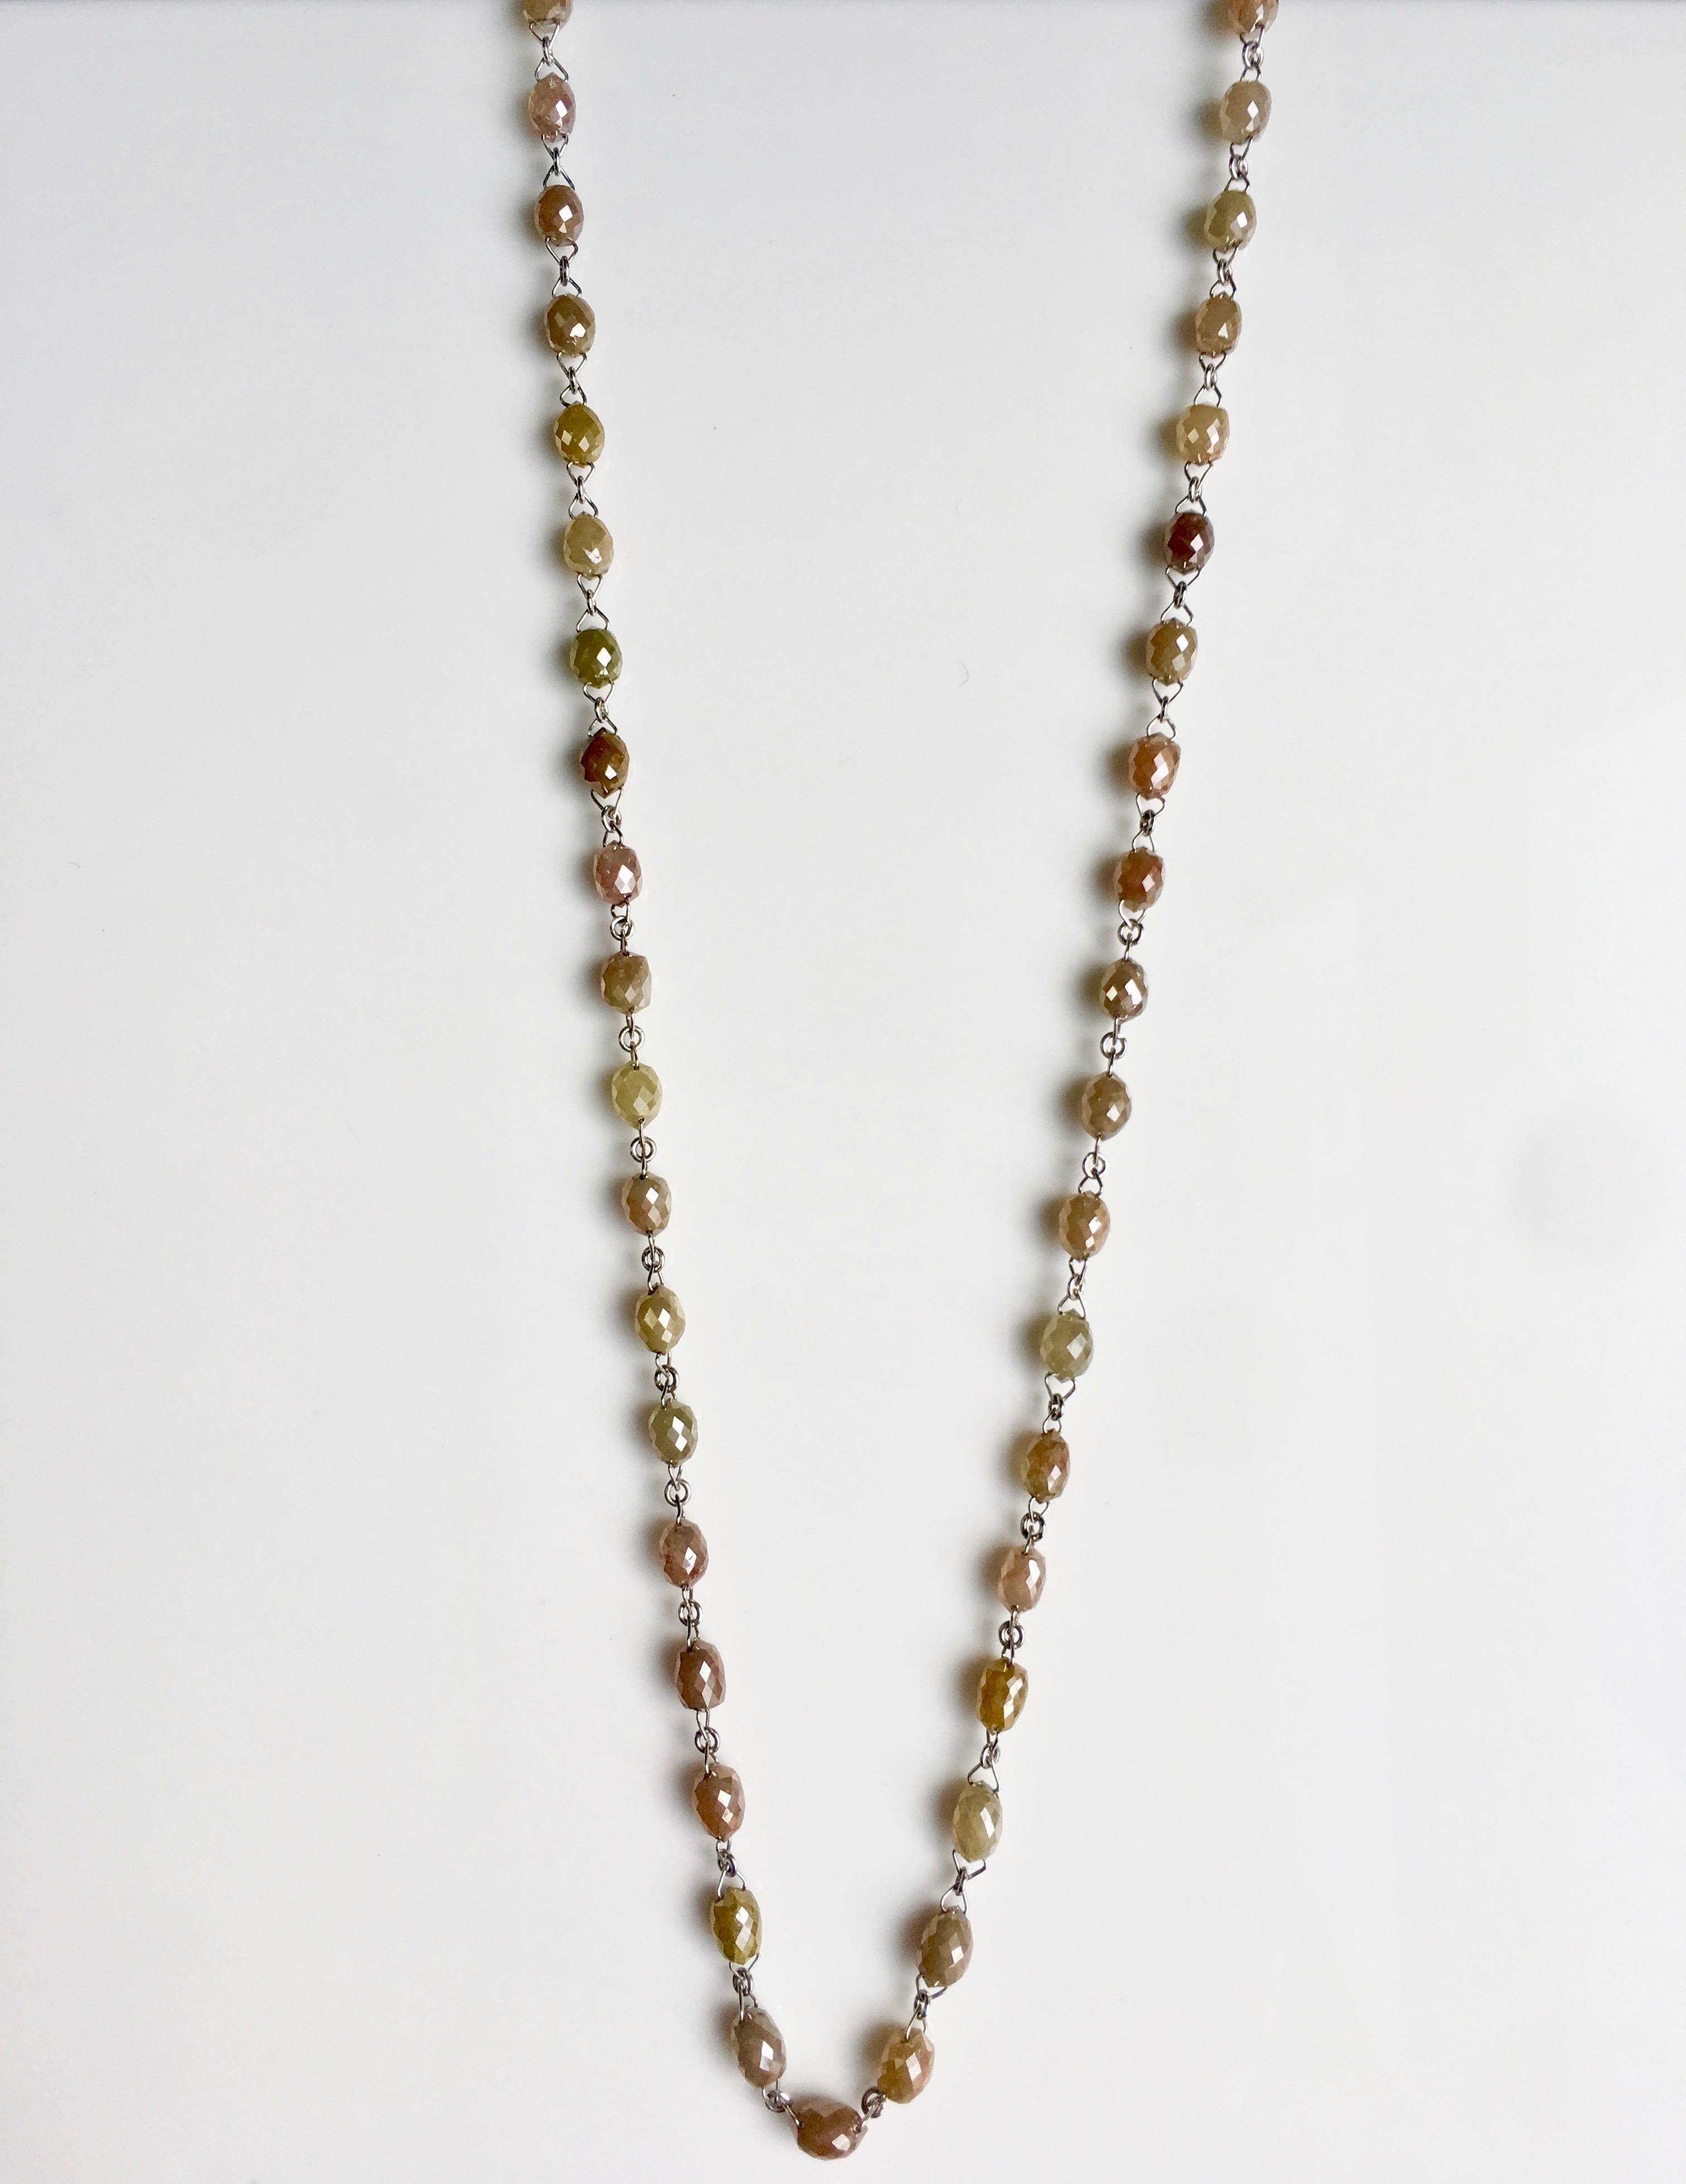 40 Carat Natural Fancy Multicolored Diamond Bead Necklace in 18 Karat In New Condition For Sale In New York, NY